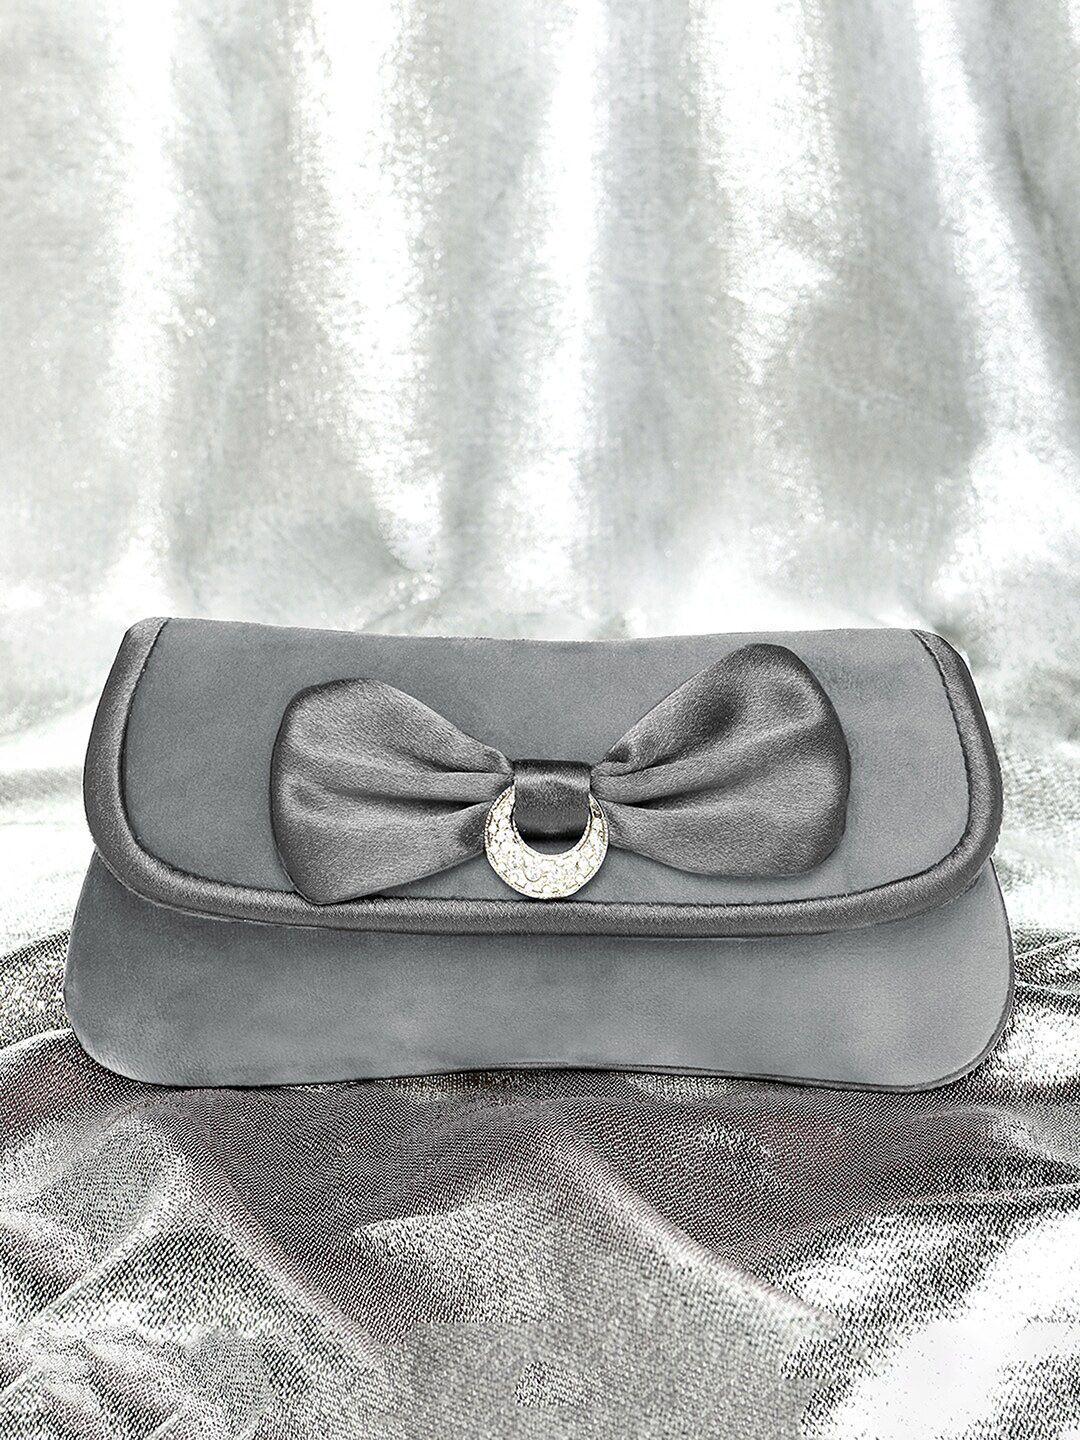 peora bow detail purse clutch with shoulder strap